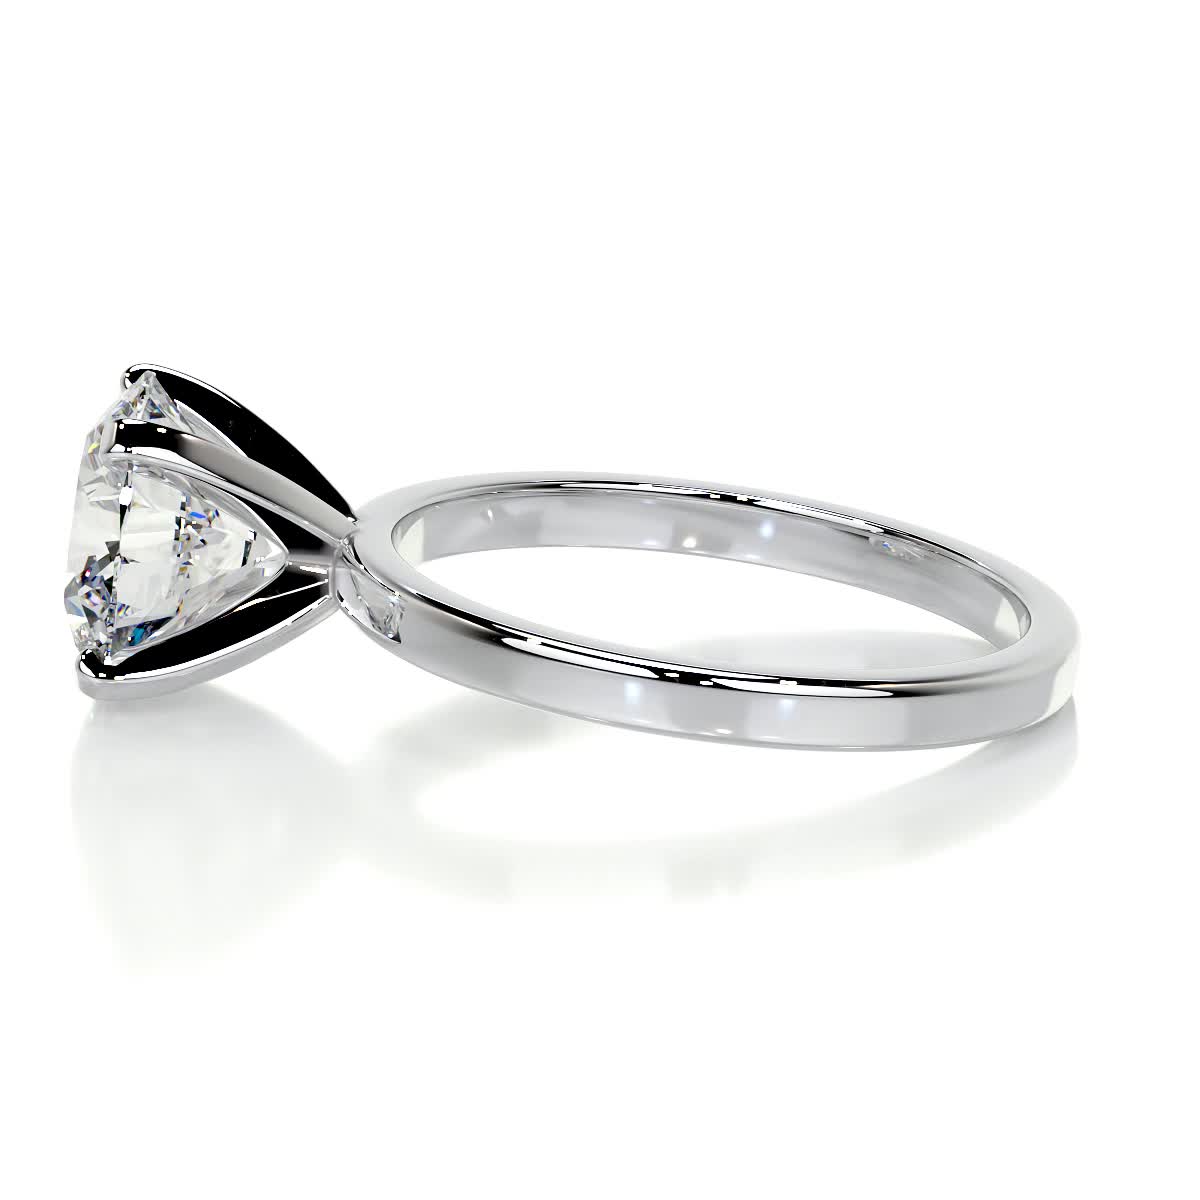 2.0 CT Round Solitaire CVD E/VS2 Diamond Engagement Ring